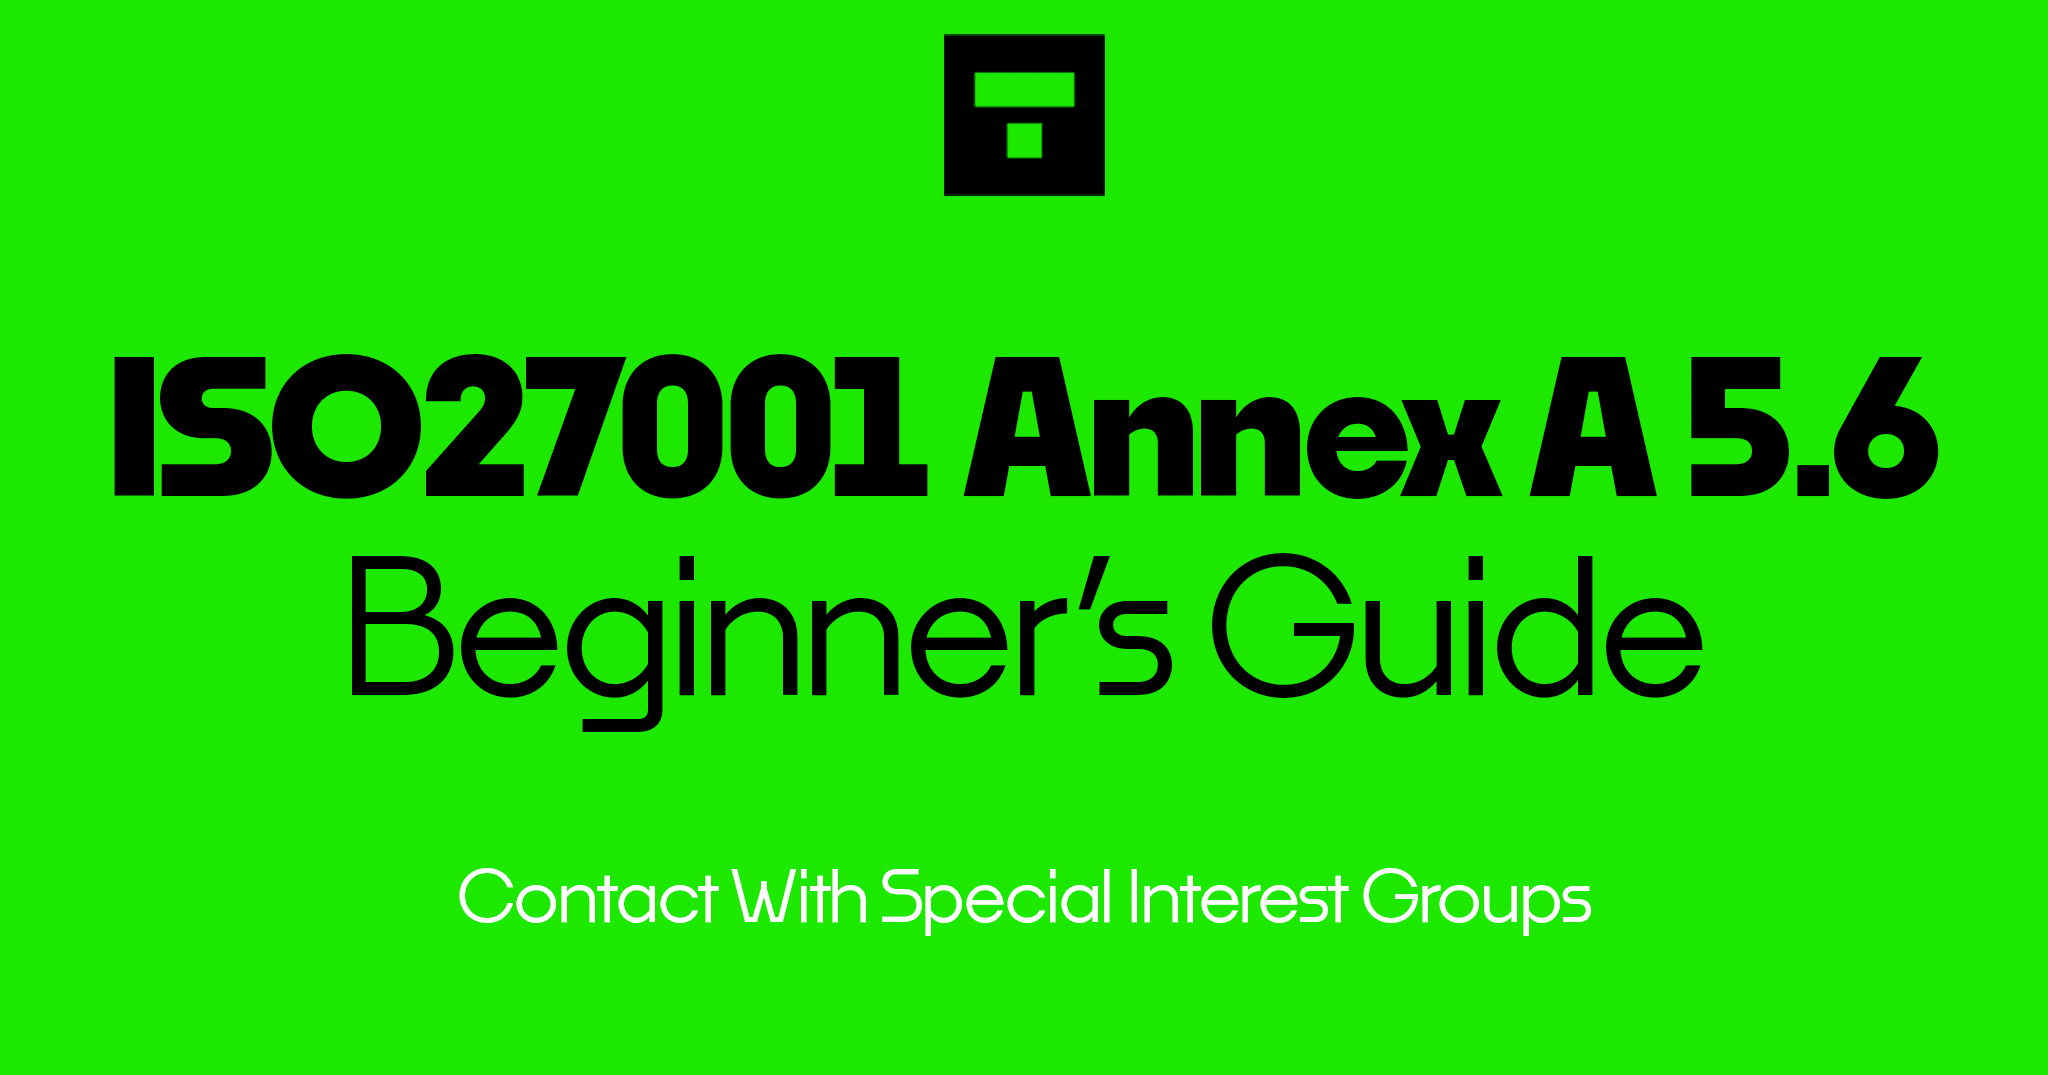 ISO 27001 Annex A 5.6 Contact With Special Interest Groups Beginner’s Guide